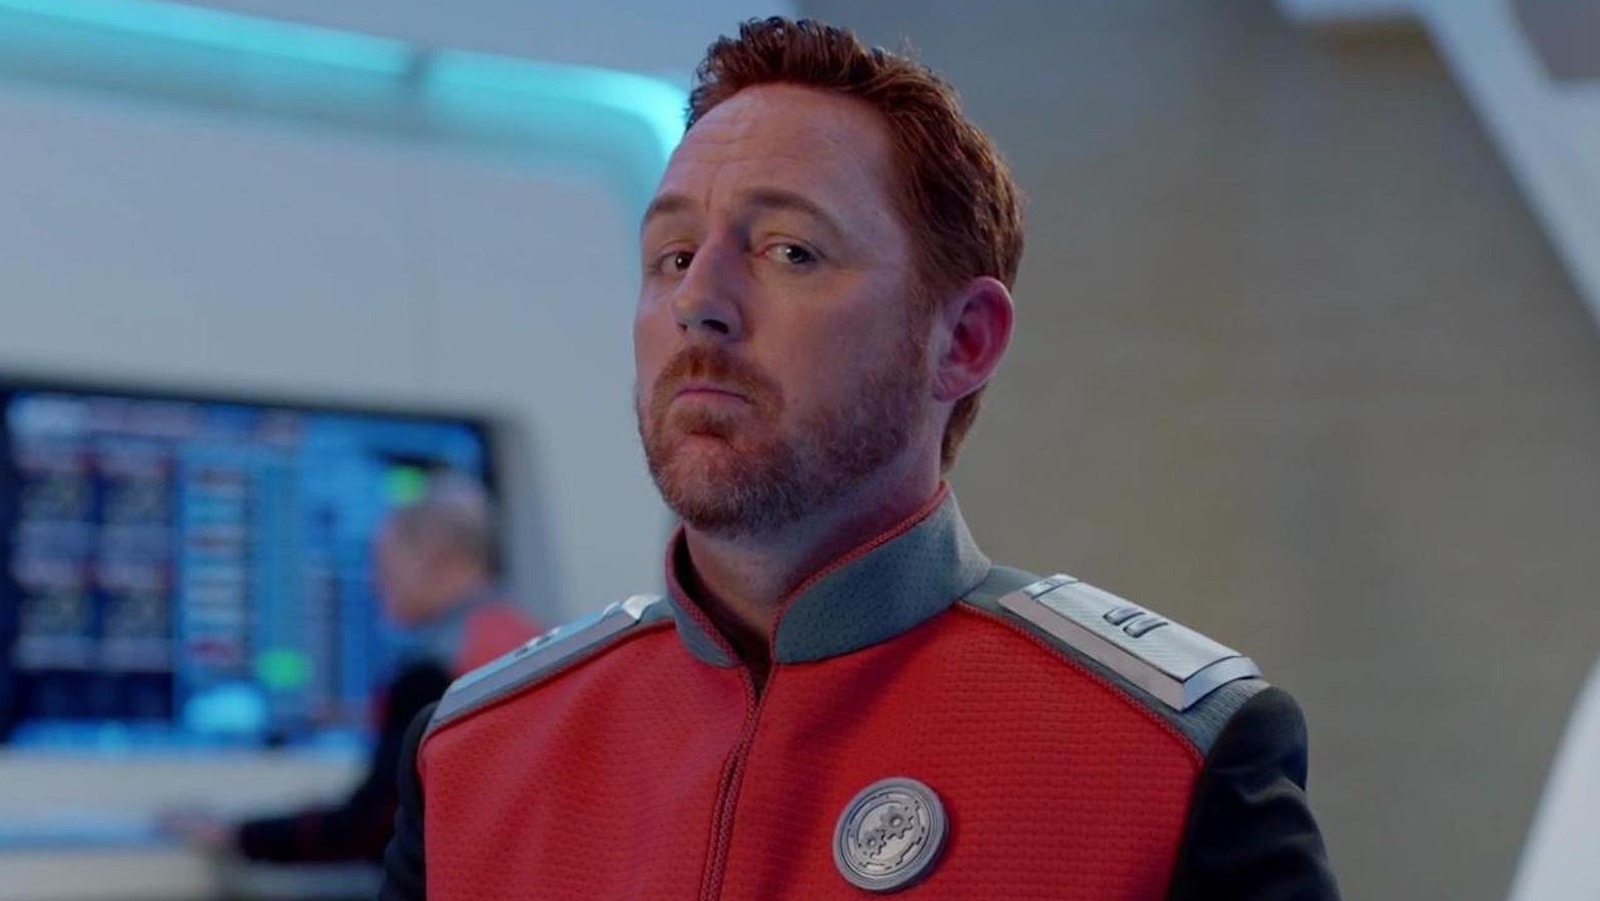 #New Horizons Actor Scott Grimes On His Big Action Scene And Embracing More Drama [Interview]